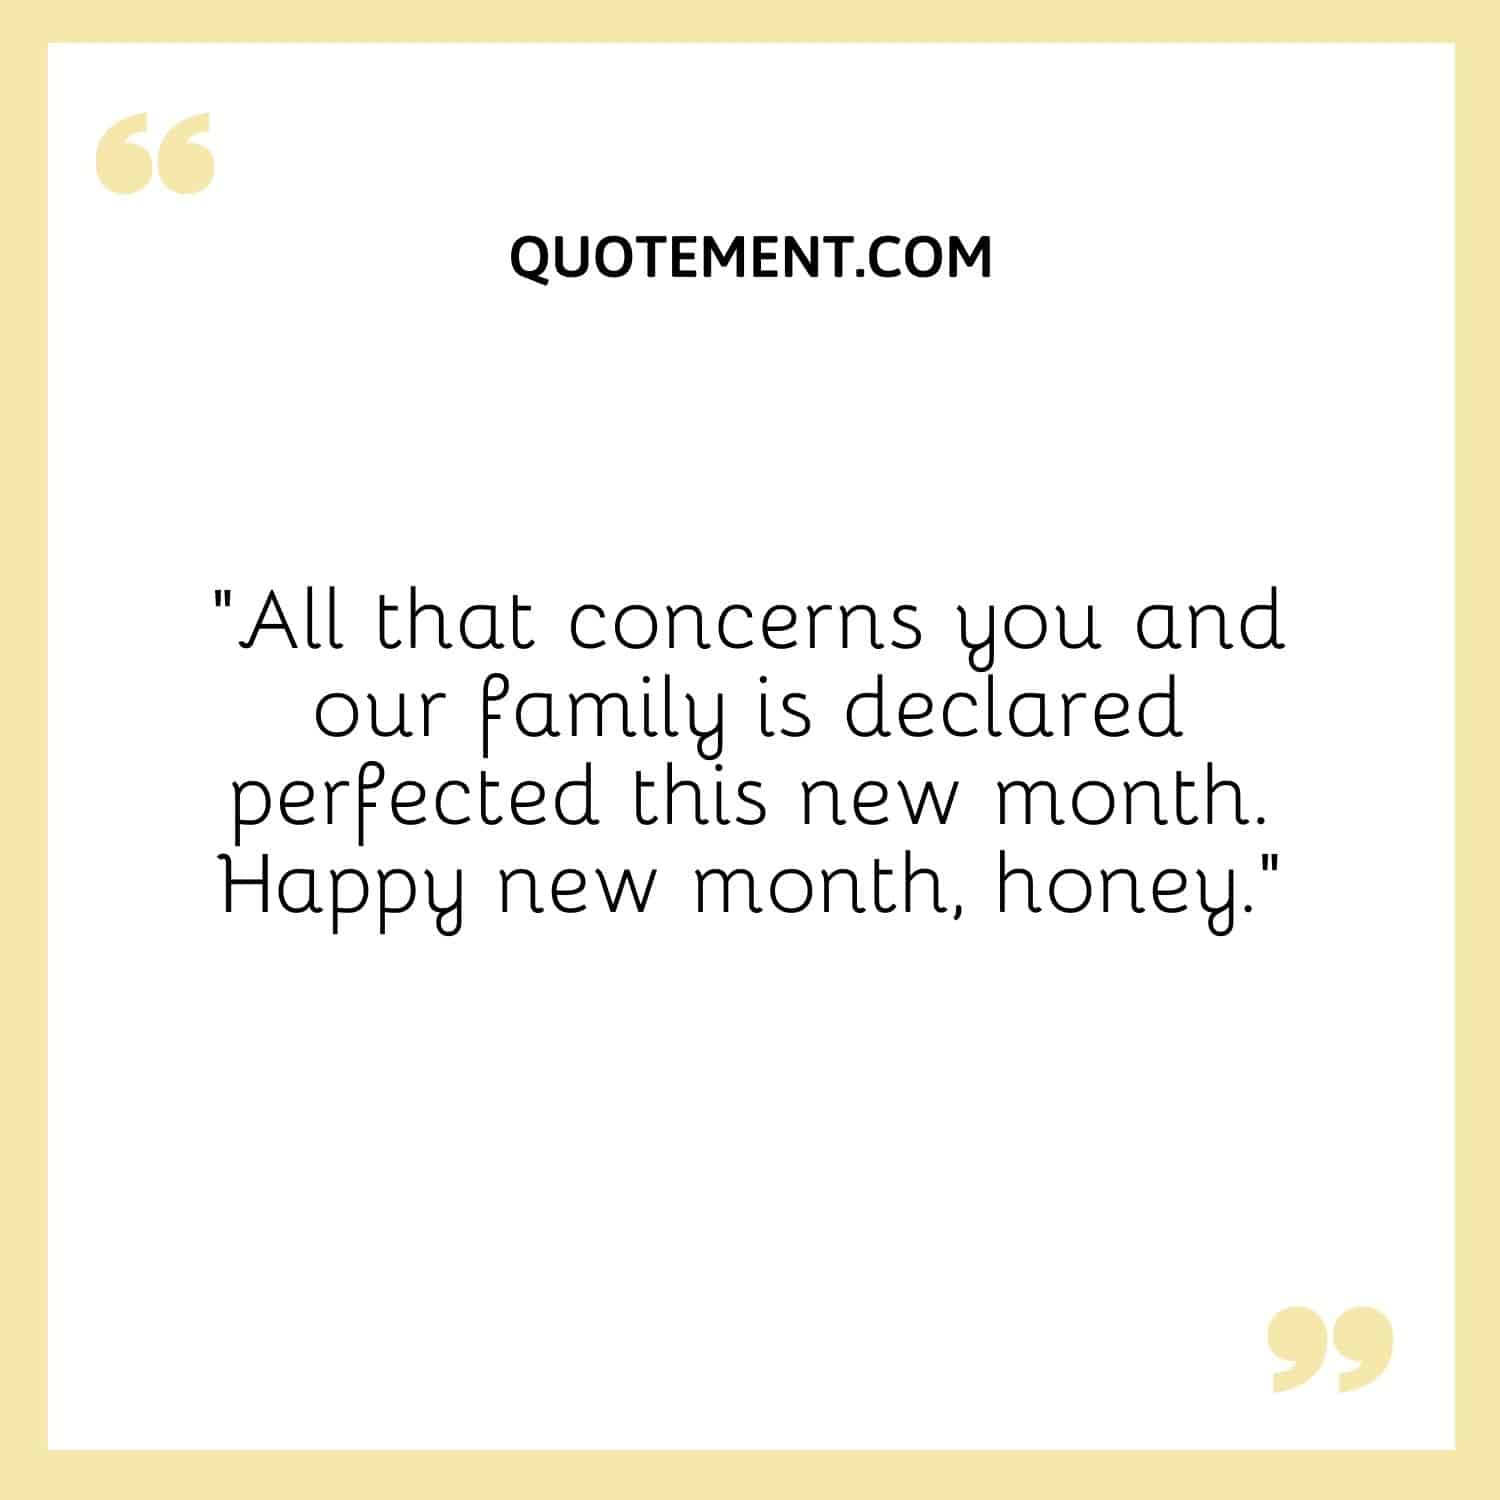 All that concerns you and our family is declared perfected this new month